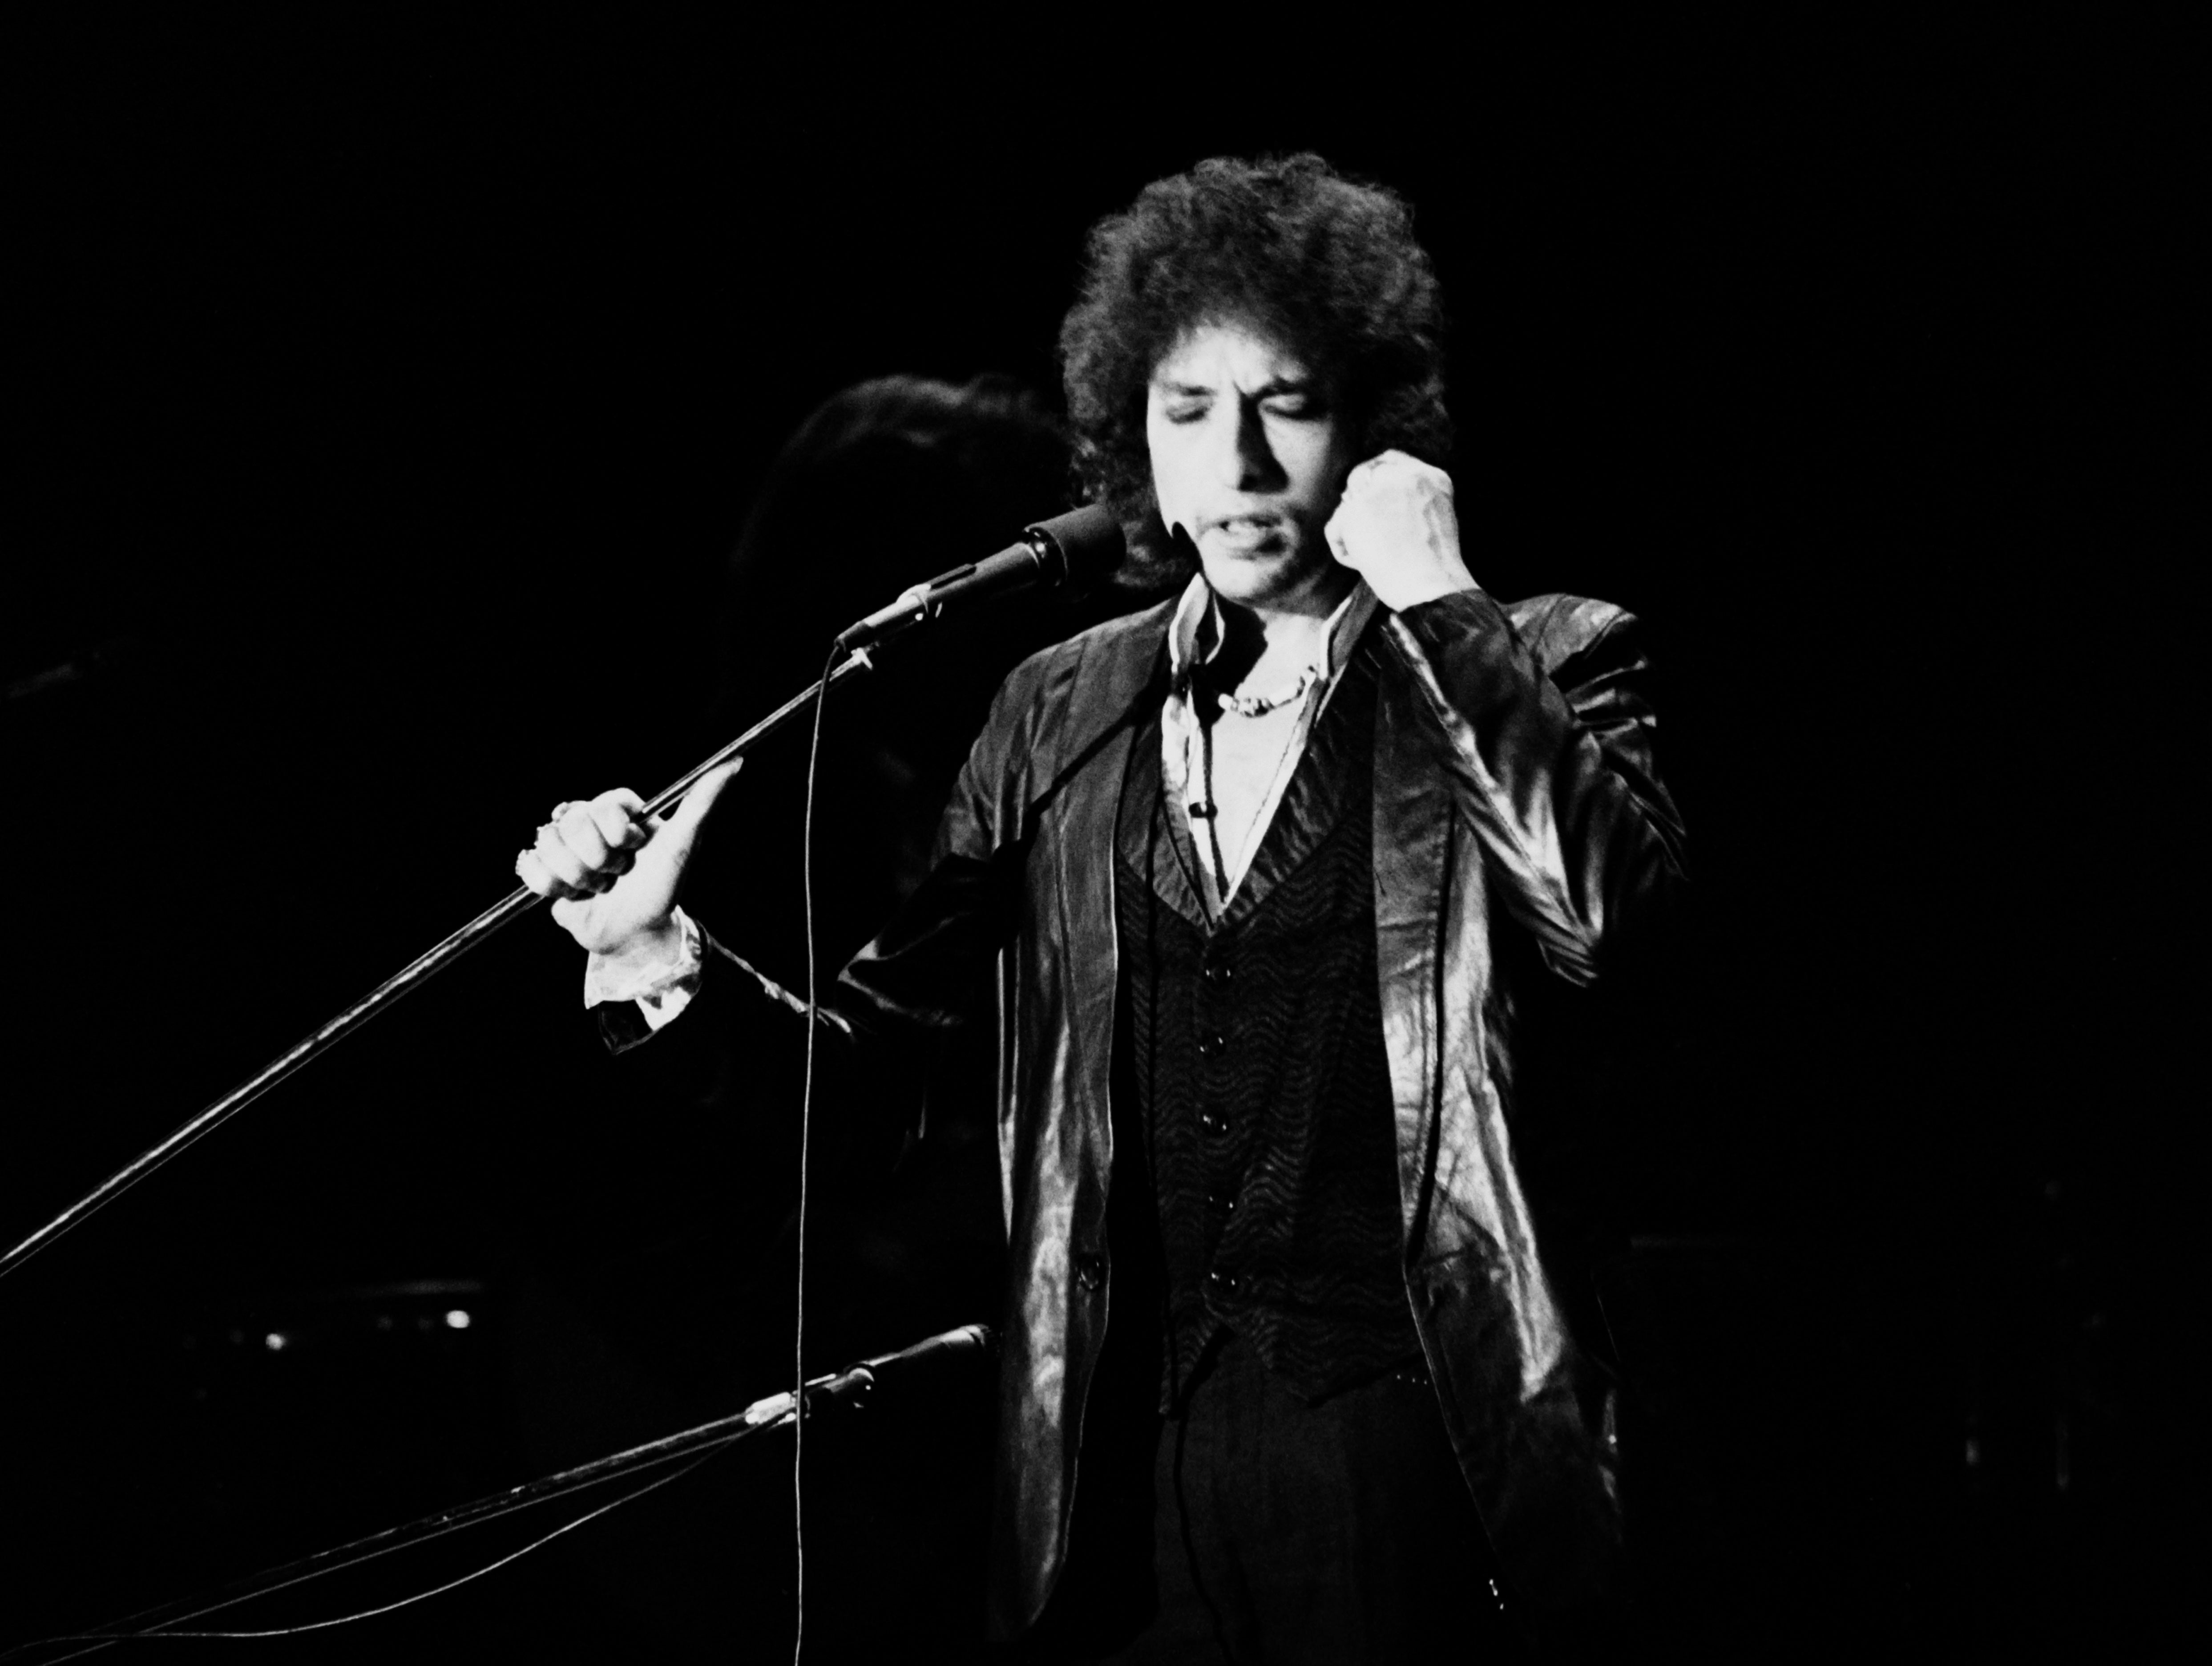 Dylan performing in 1978, a few months before the events that would lead to his conversion